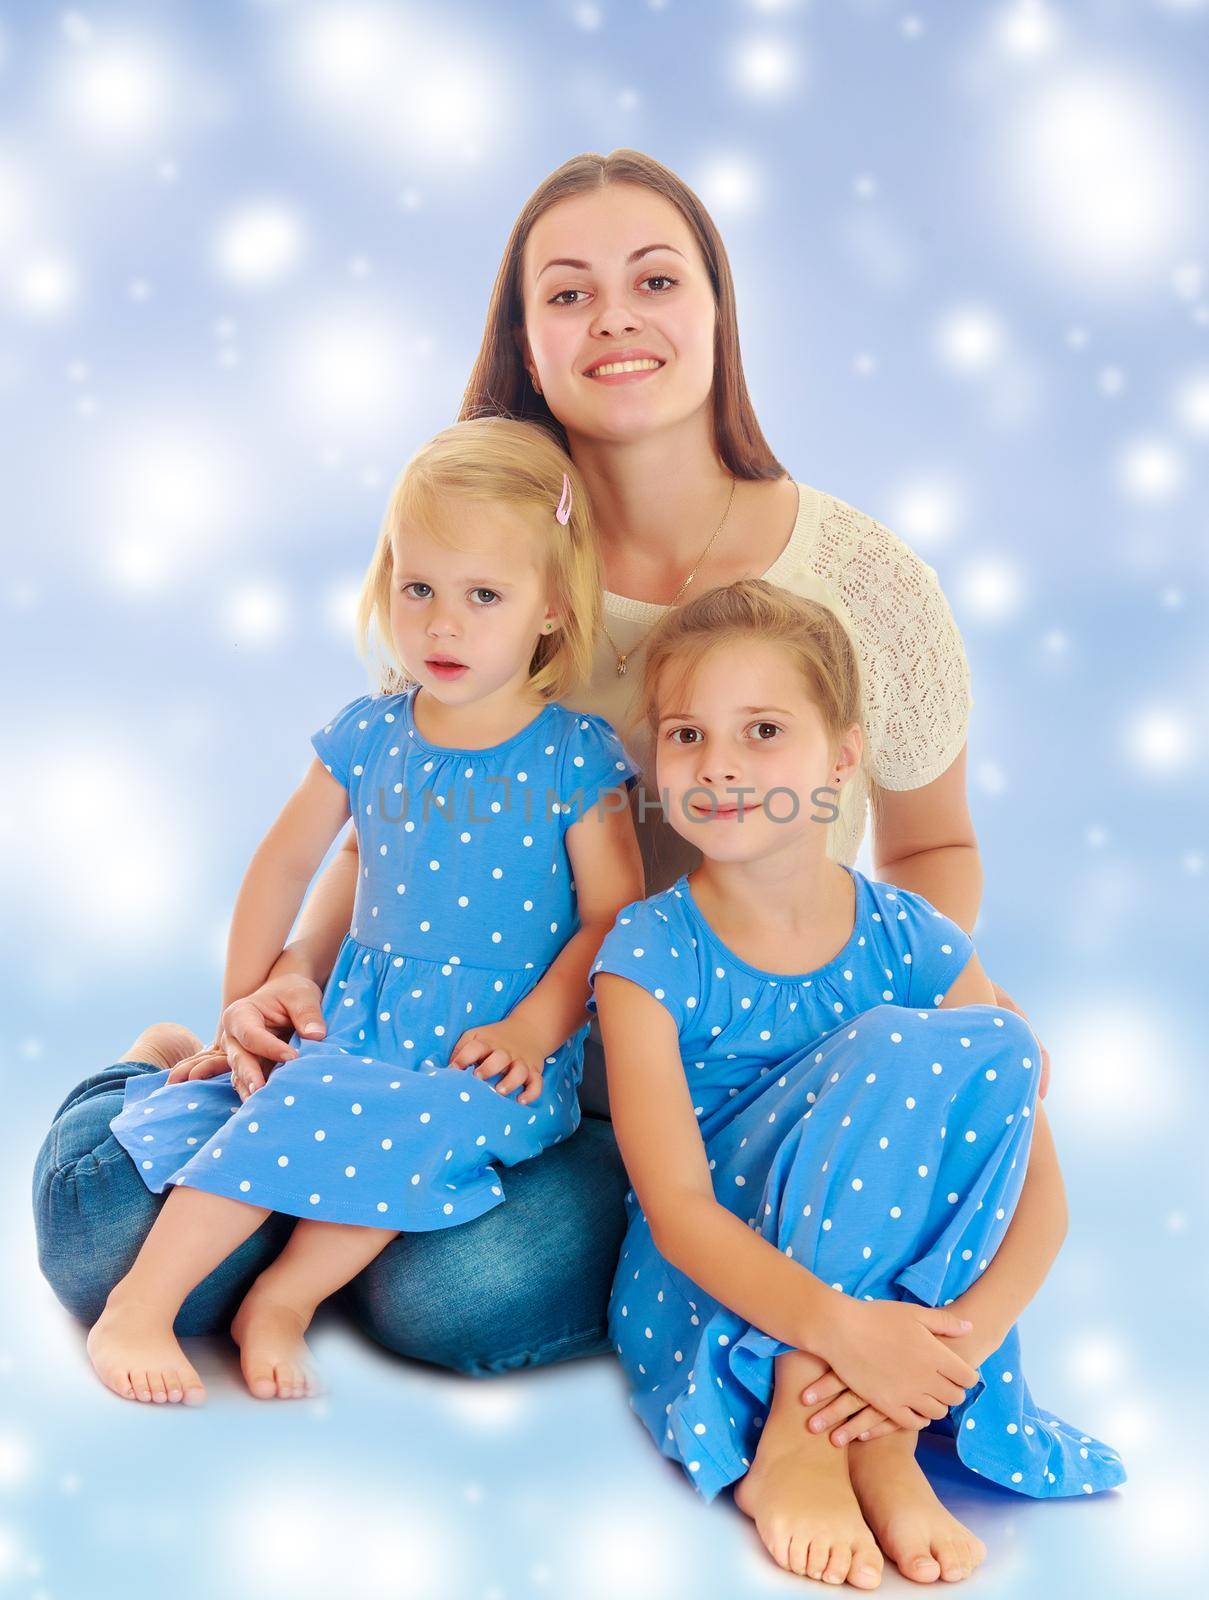 Beautiful young mother with her two daughters. Girls in the same dress with polka dots. Look directly at the camera.The concept of family happiness and mutual understanding between parents